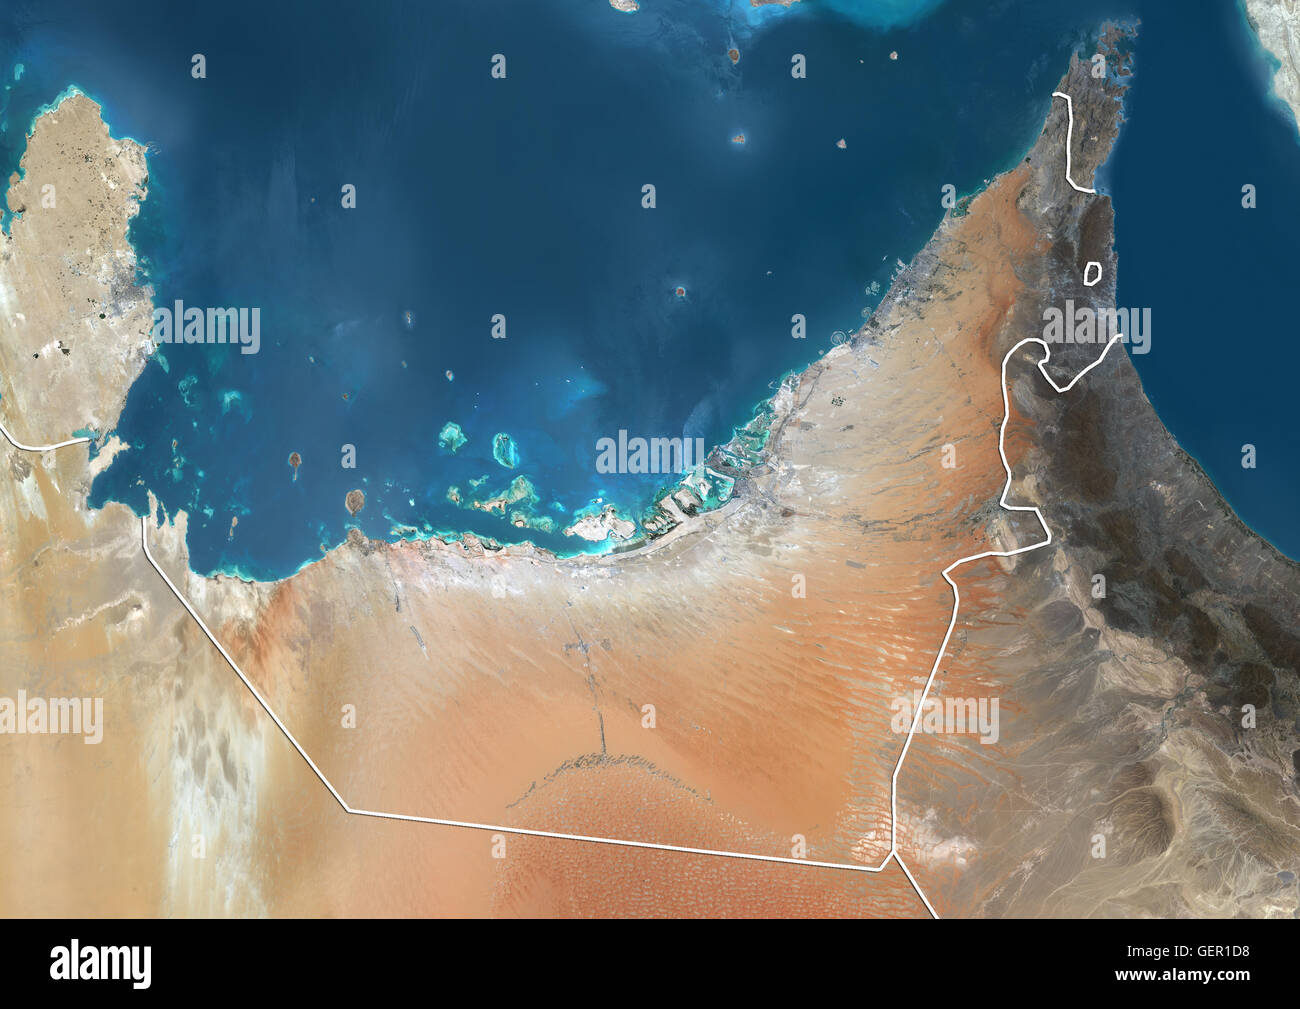 Satellite view of the United Arab Emirates (with country boundaries). The image shows the Emirates of Dubai, Sharjah, Ajman, Umm al-Quwain, Ras al-Khaimah and Fujairah. This image was compiled from data acquired by Landsat 8 satellite in 2014. Stock Photo